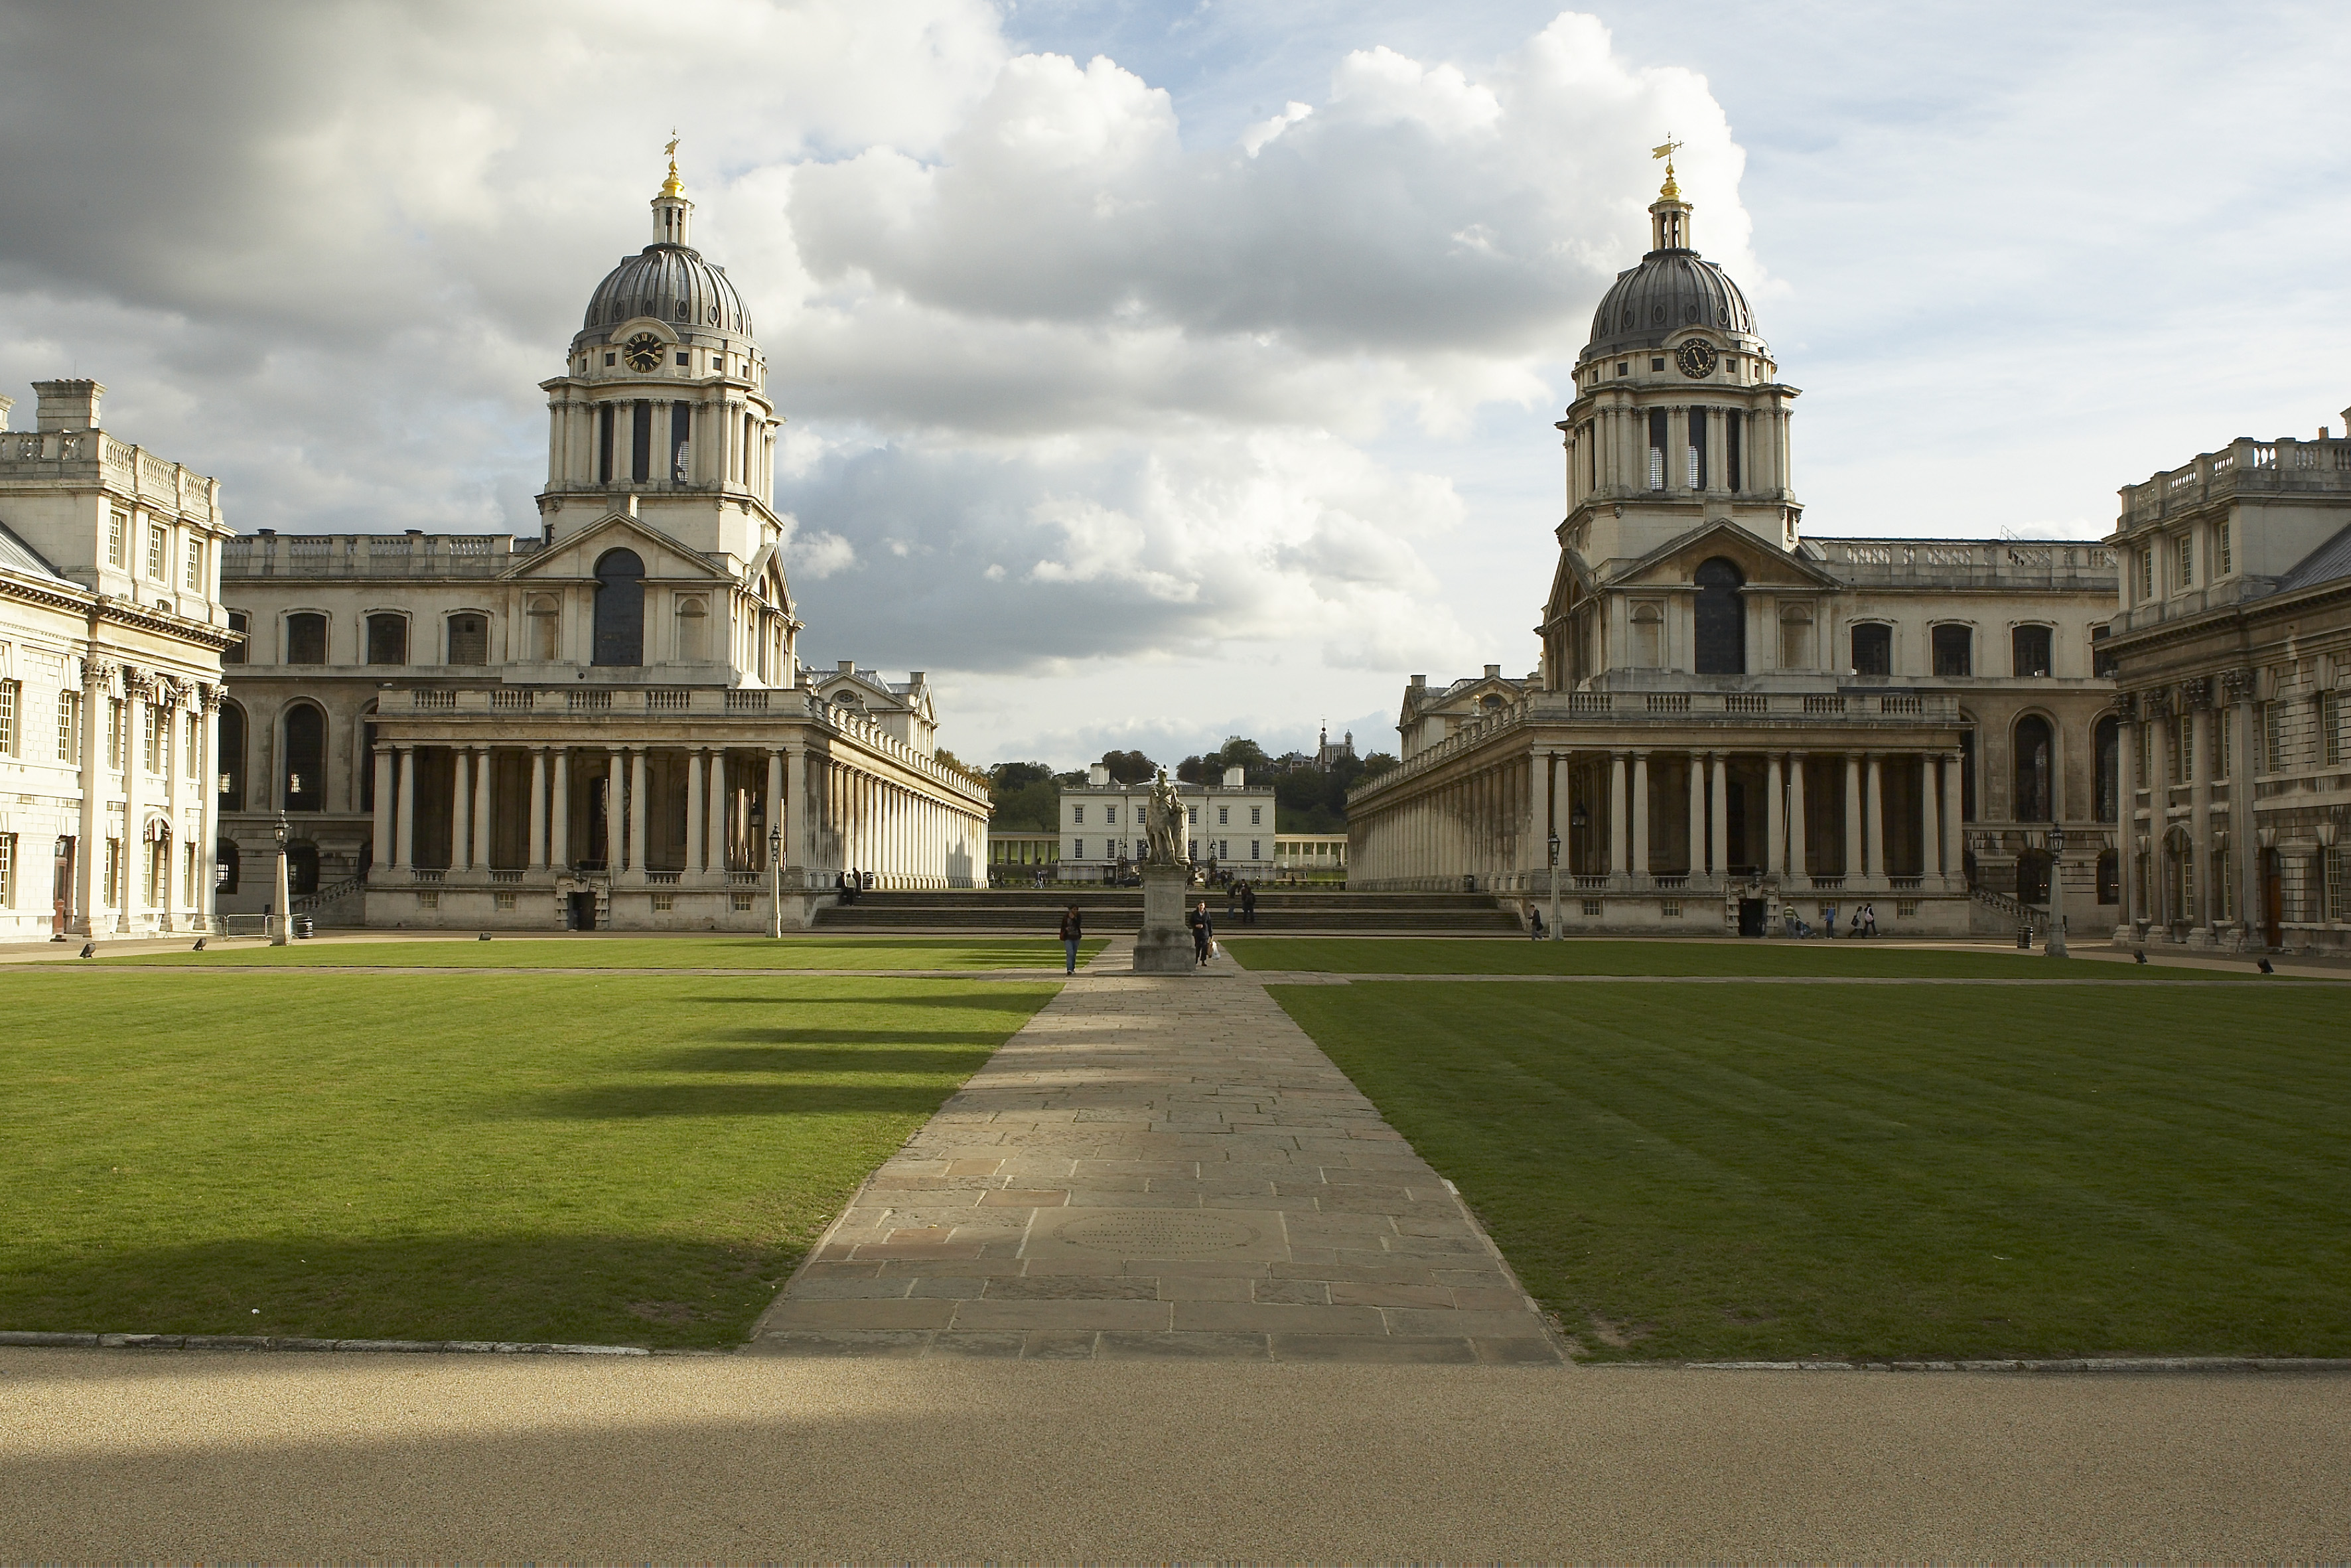 HD Quality Wallpaper | Collection: Man Made, 3543x2363 University Of Greenwich